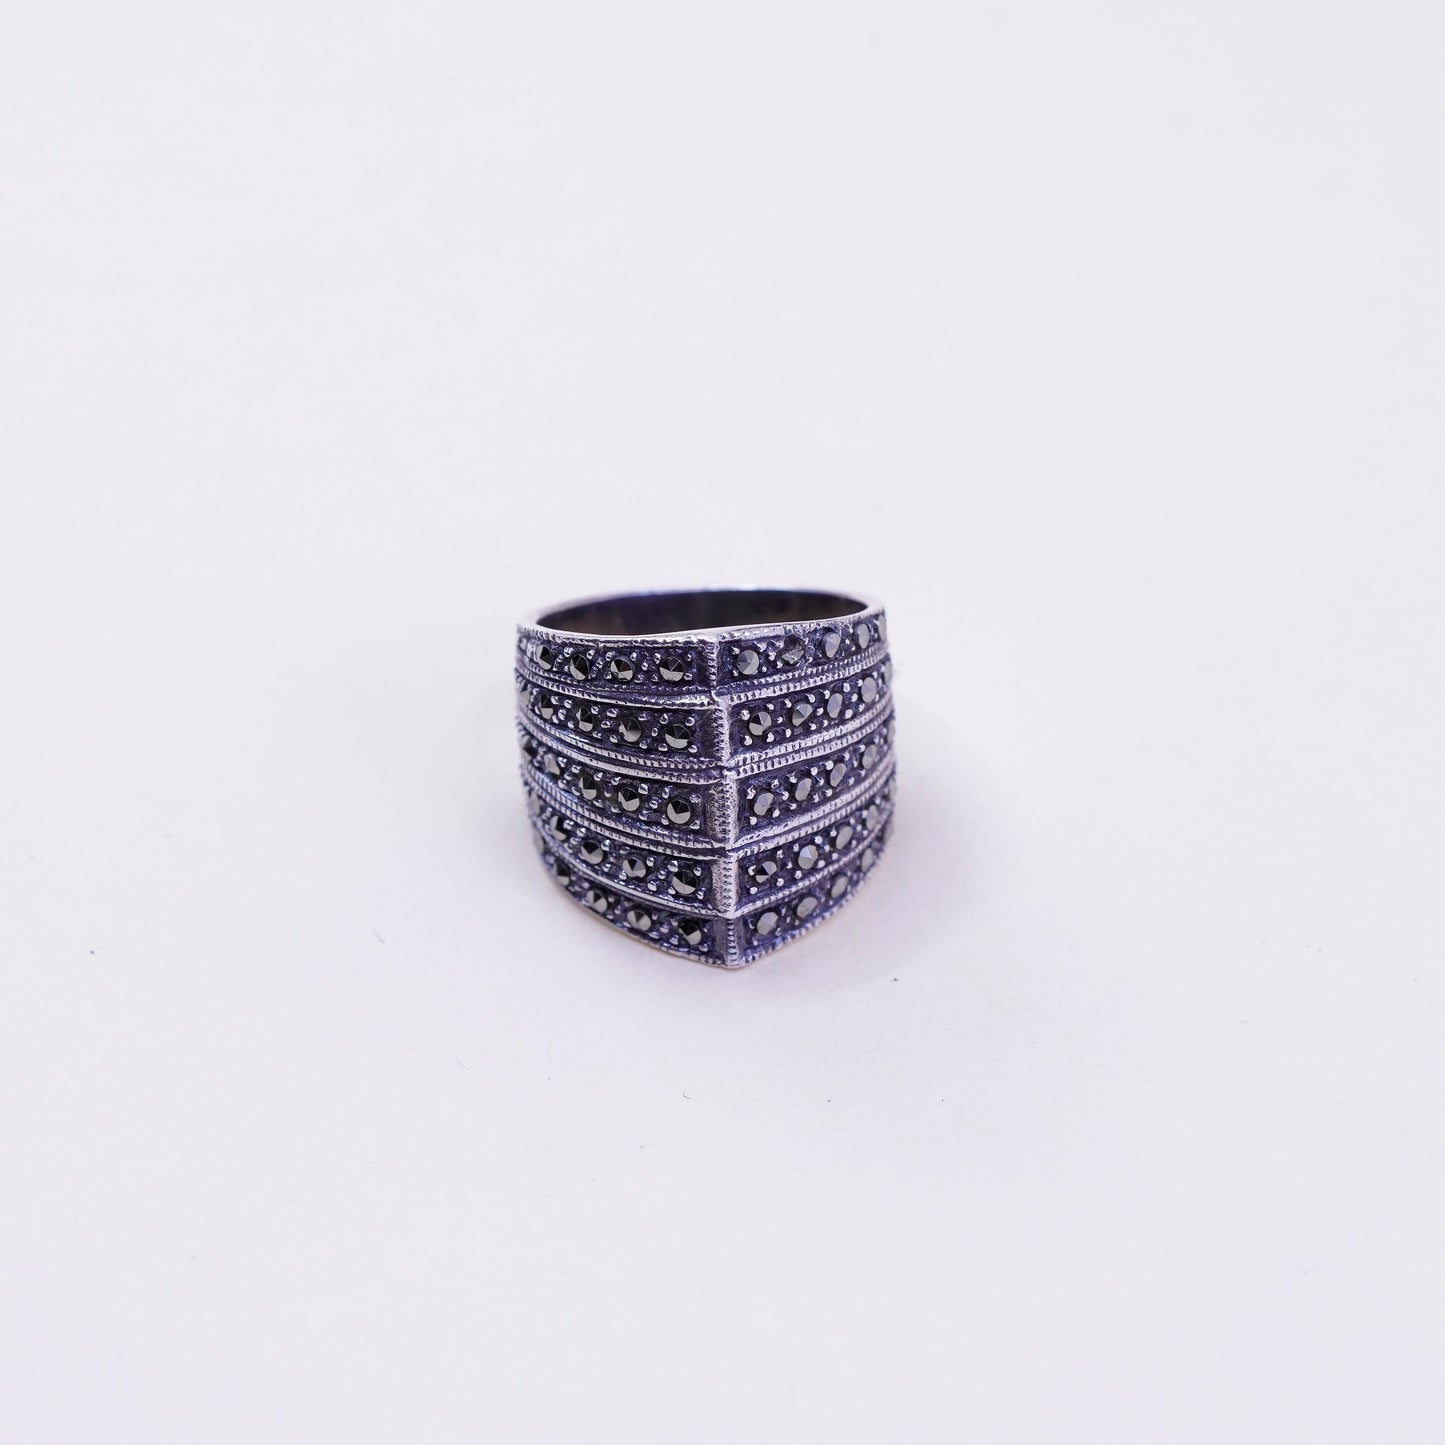 Size 6.75, Vintage Sterling silver handmade ring, 925 ribbed band w/ Marcasite